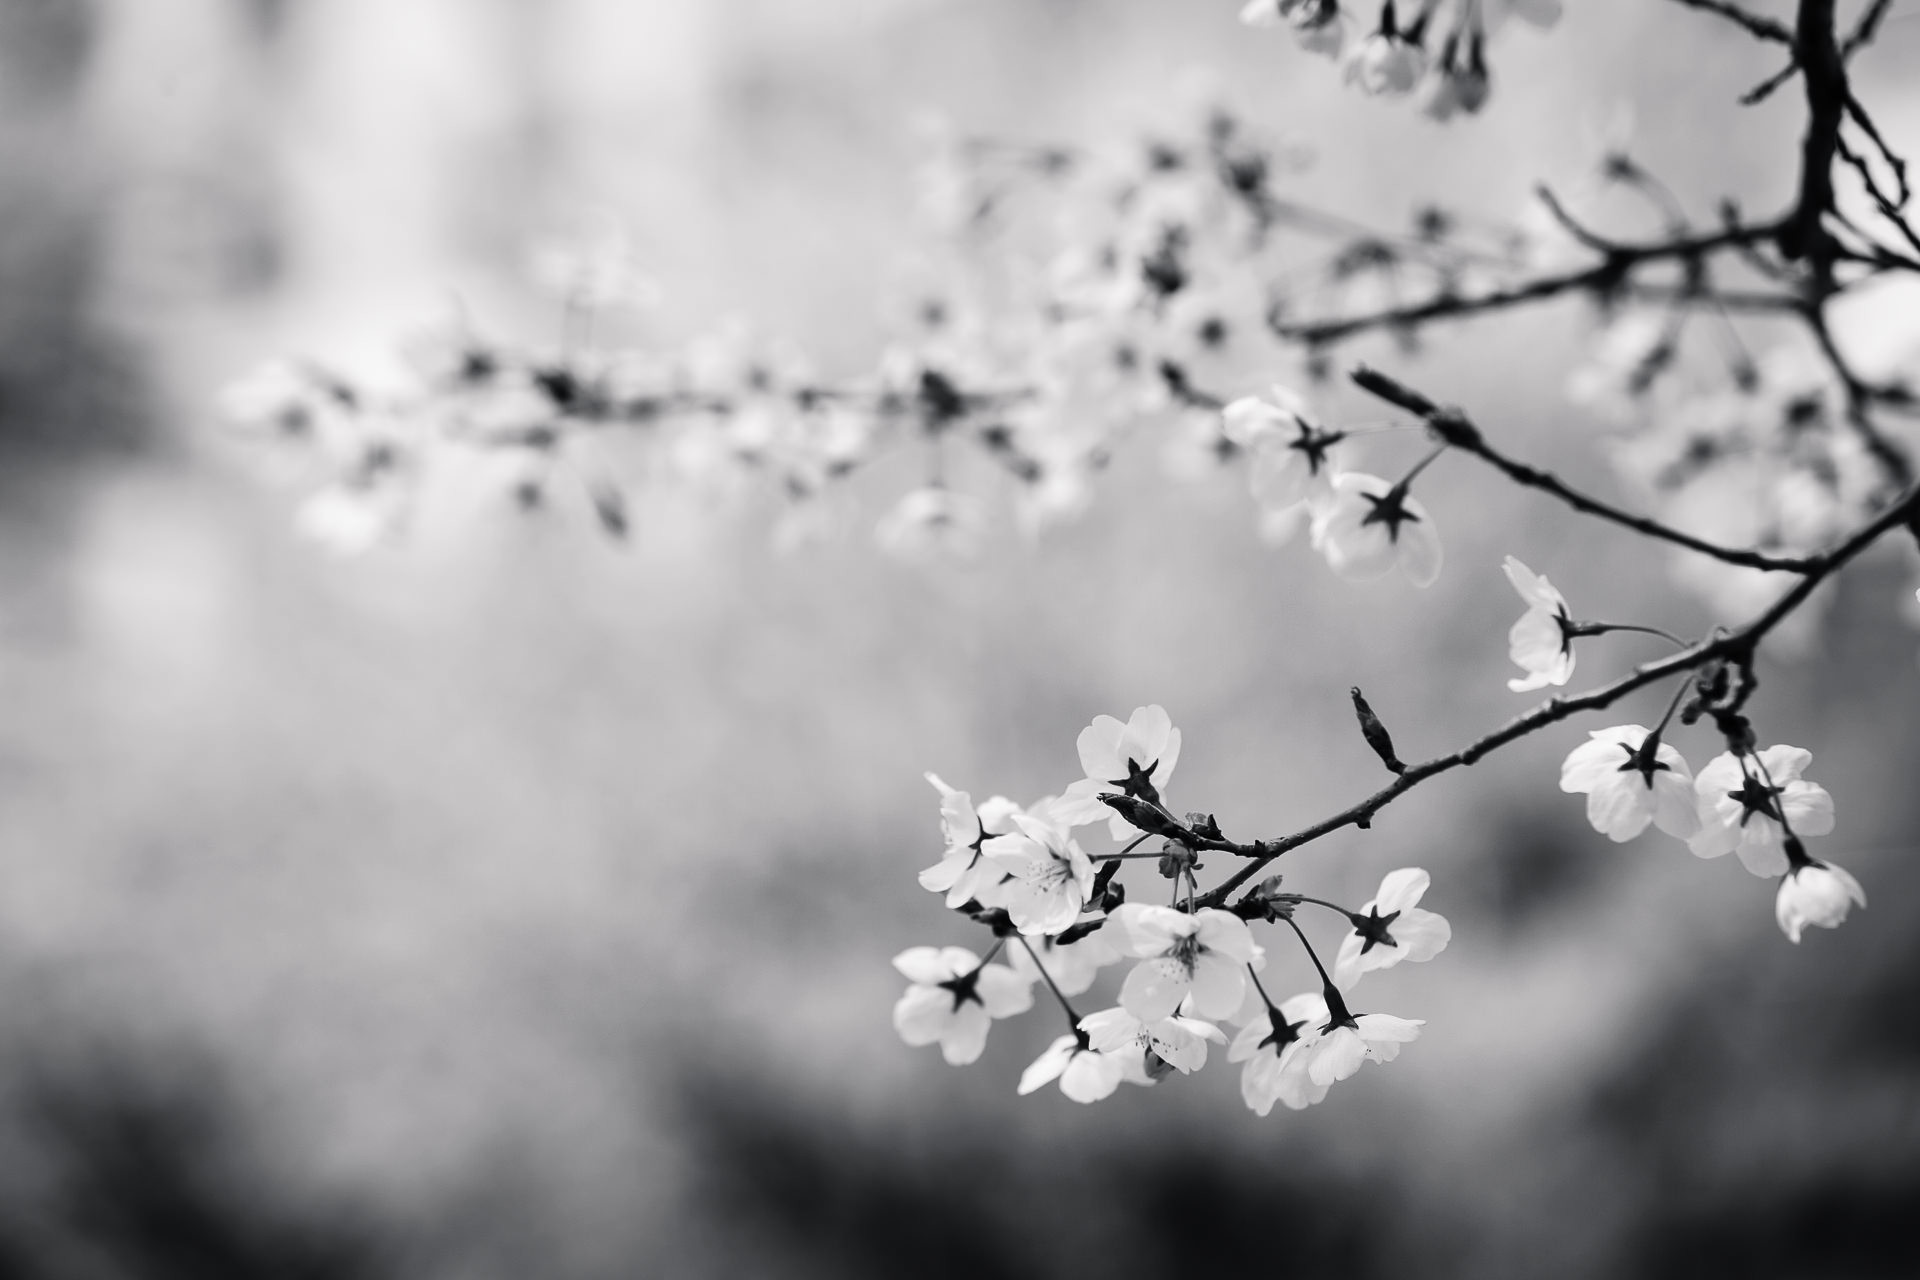 Free stock photo of black and white, flowers, branch, cherry blossom